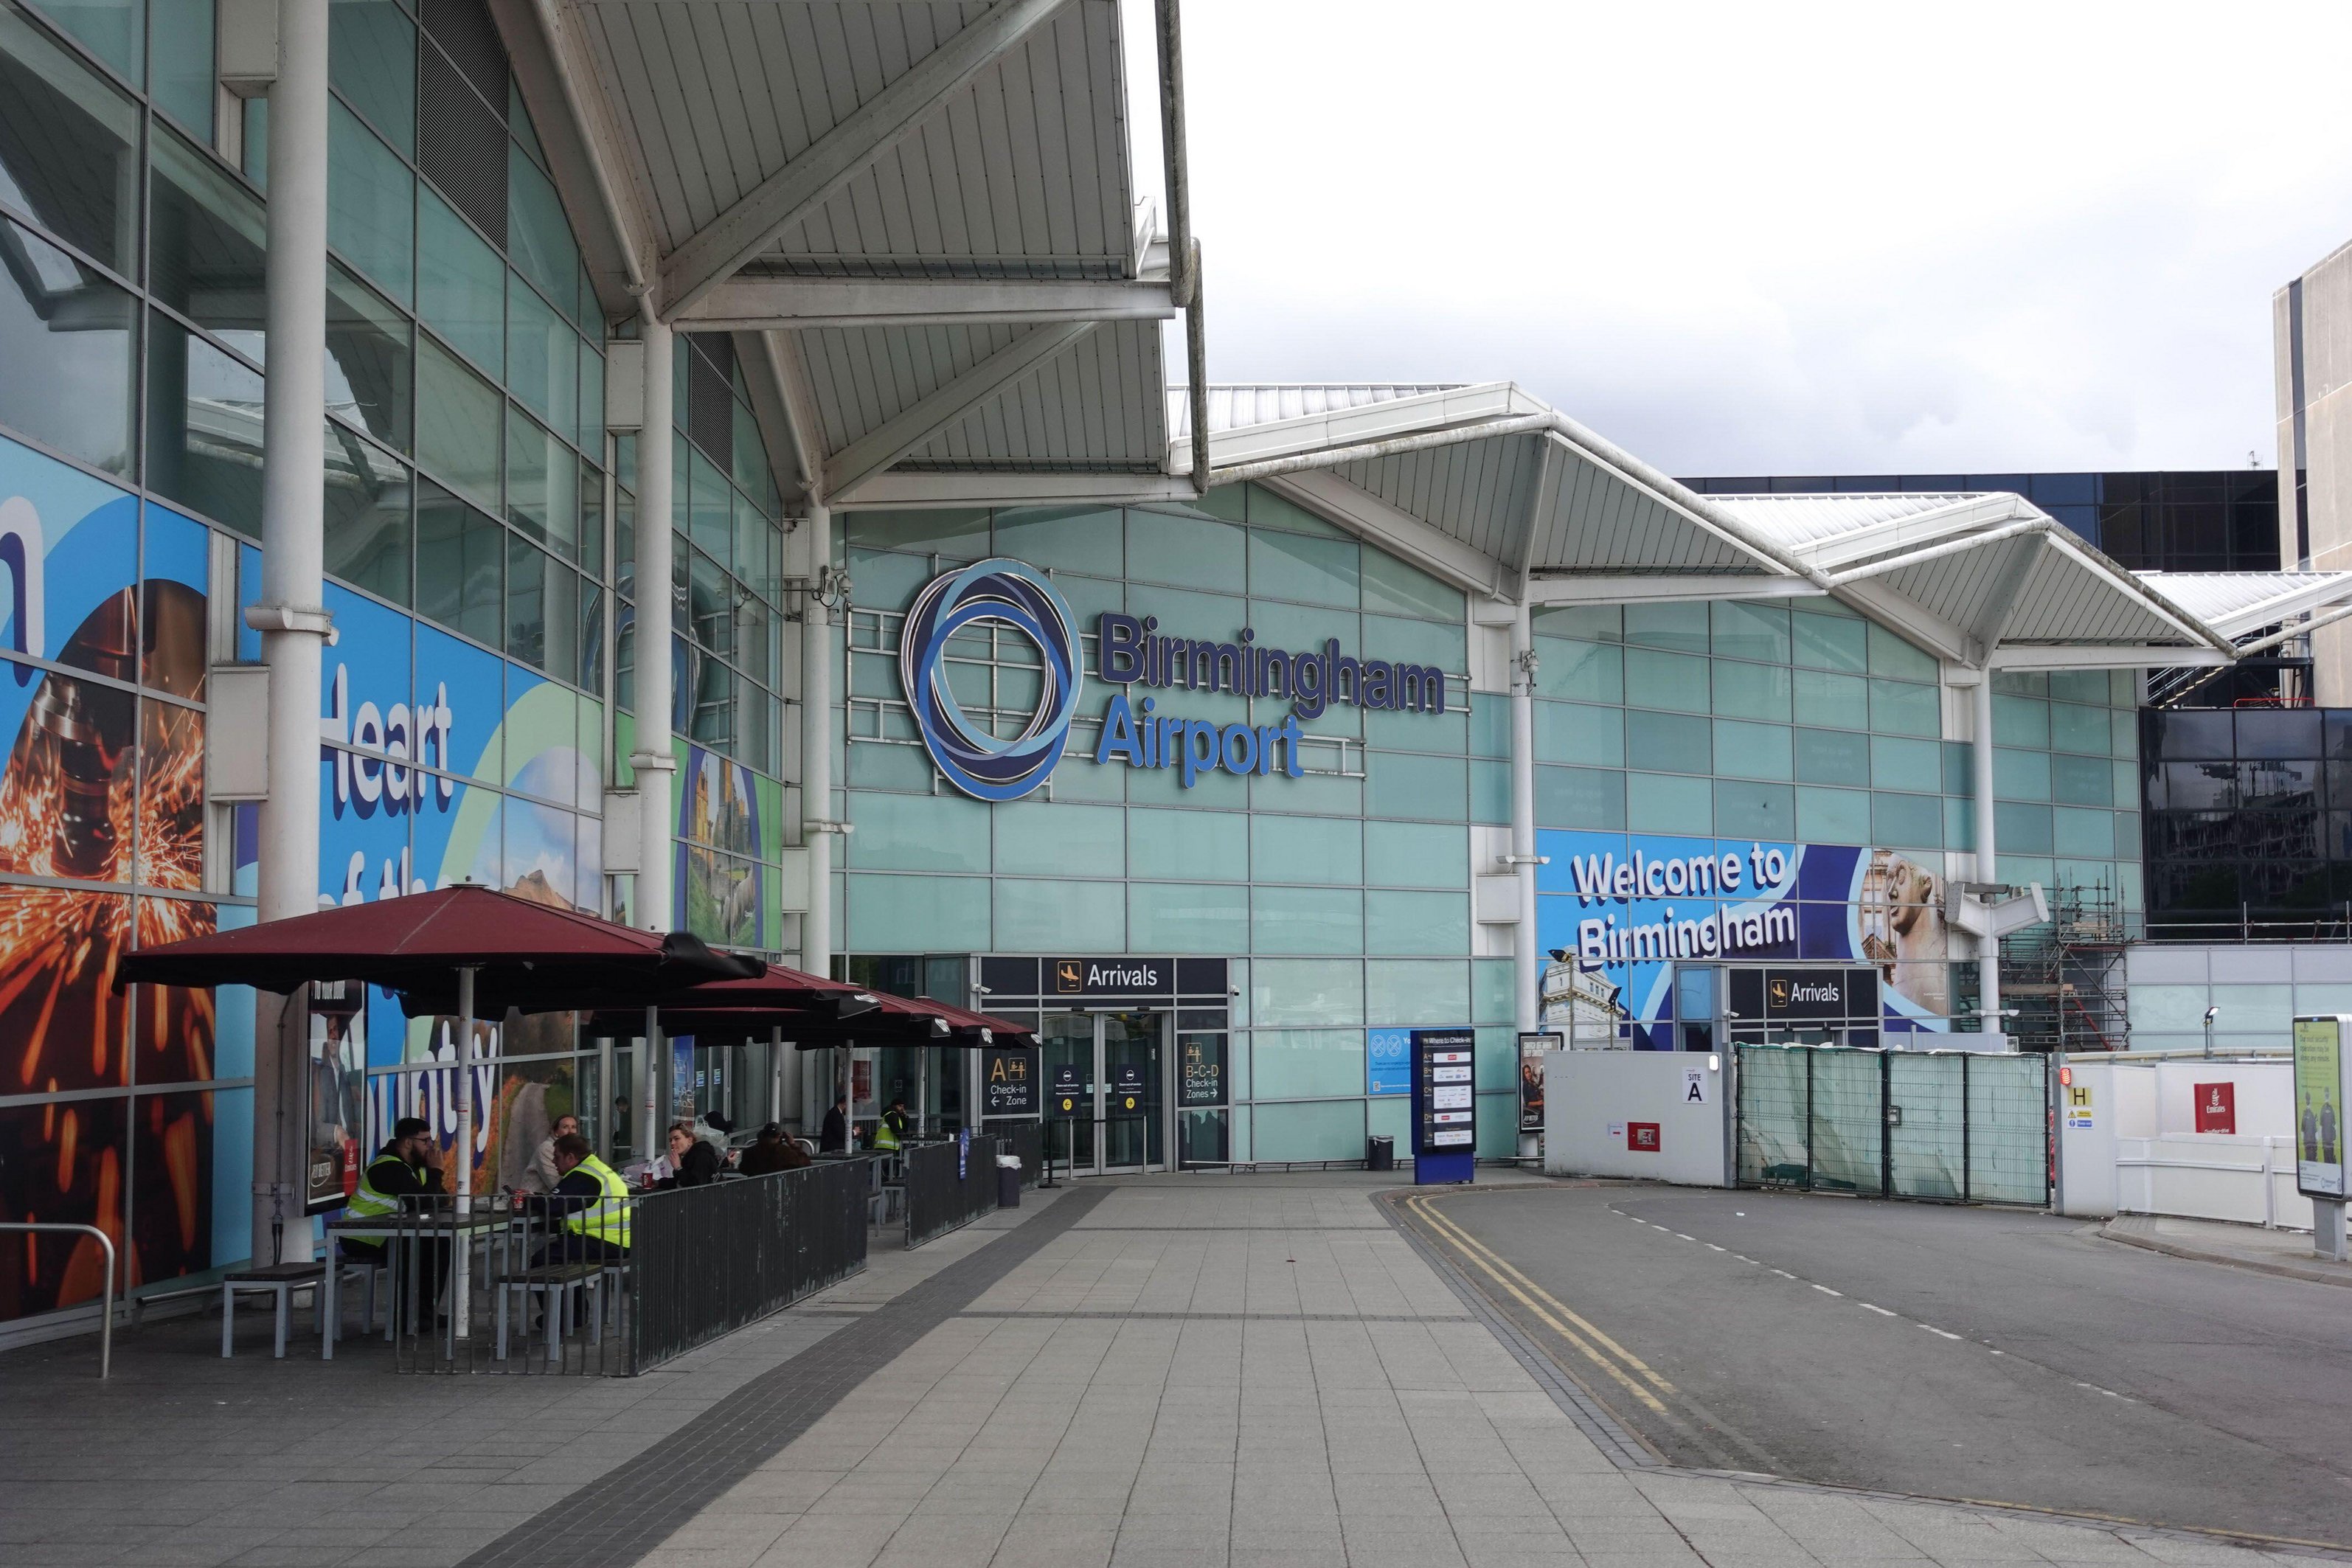 Around 15 per cent of passengers at Birmingham Airport are having their carry-on bags rejected over the liquid rule